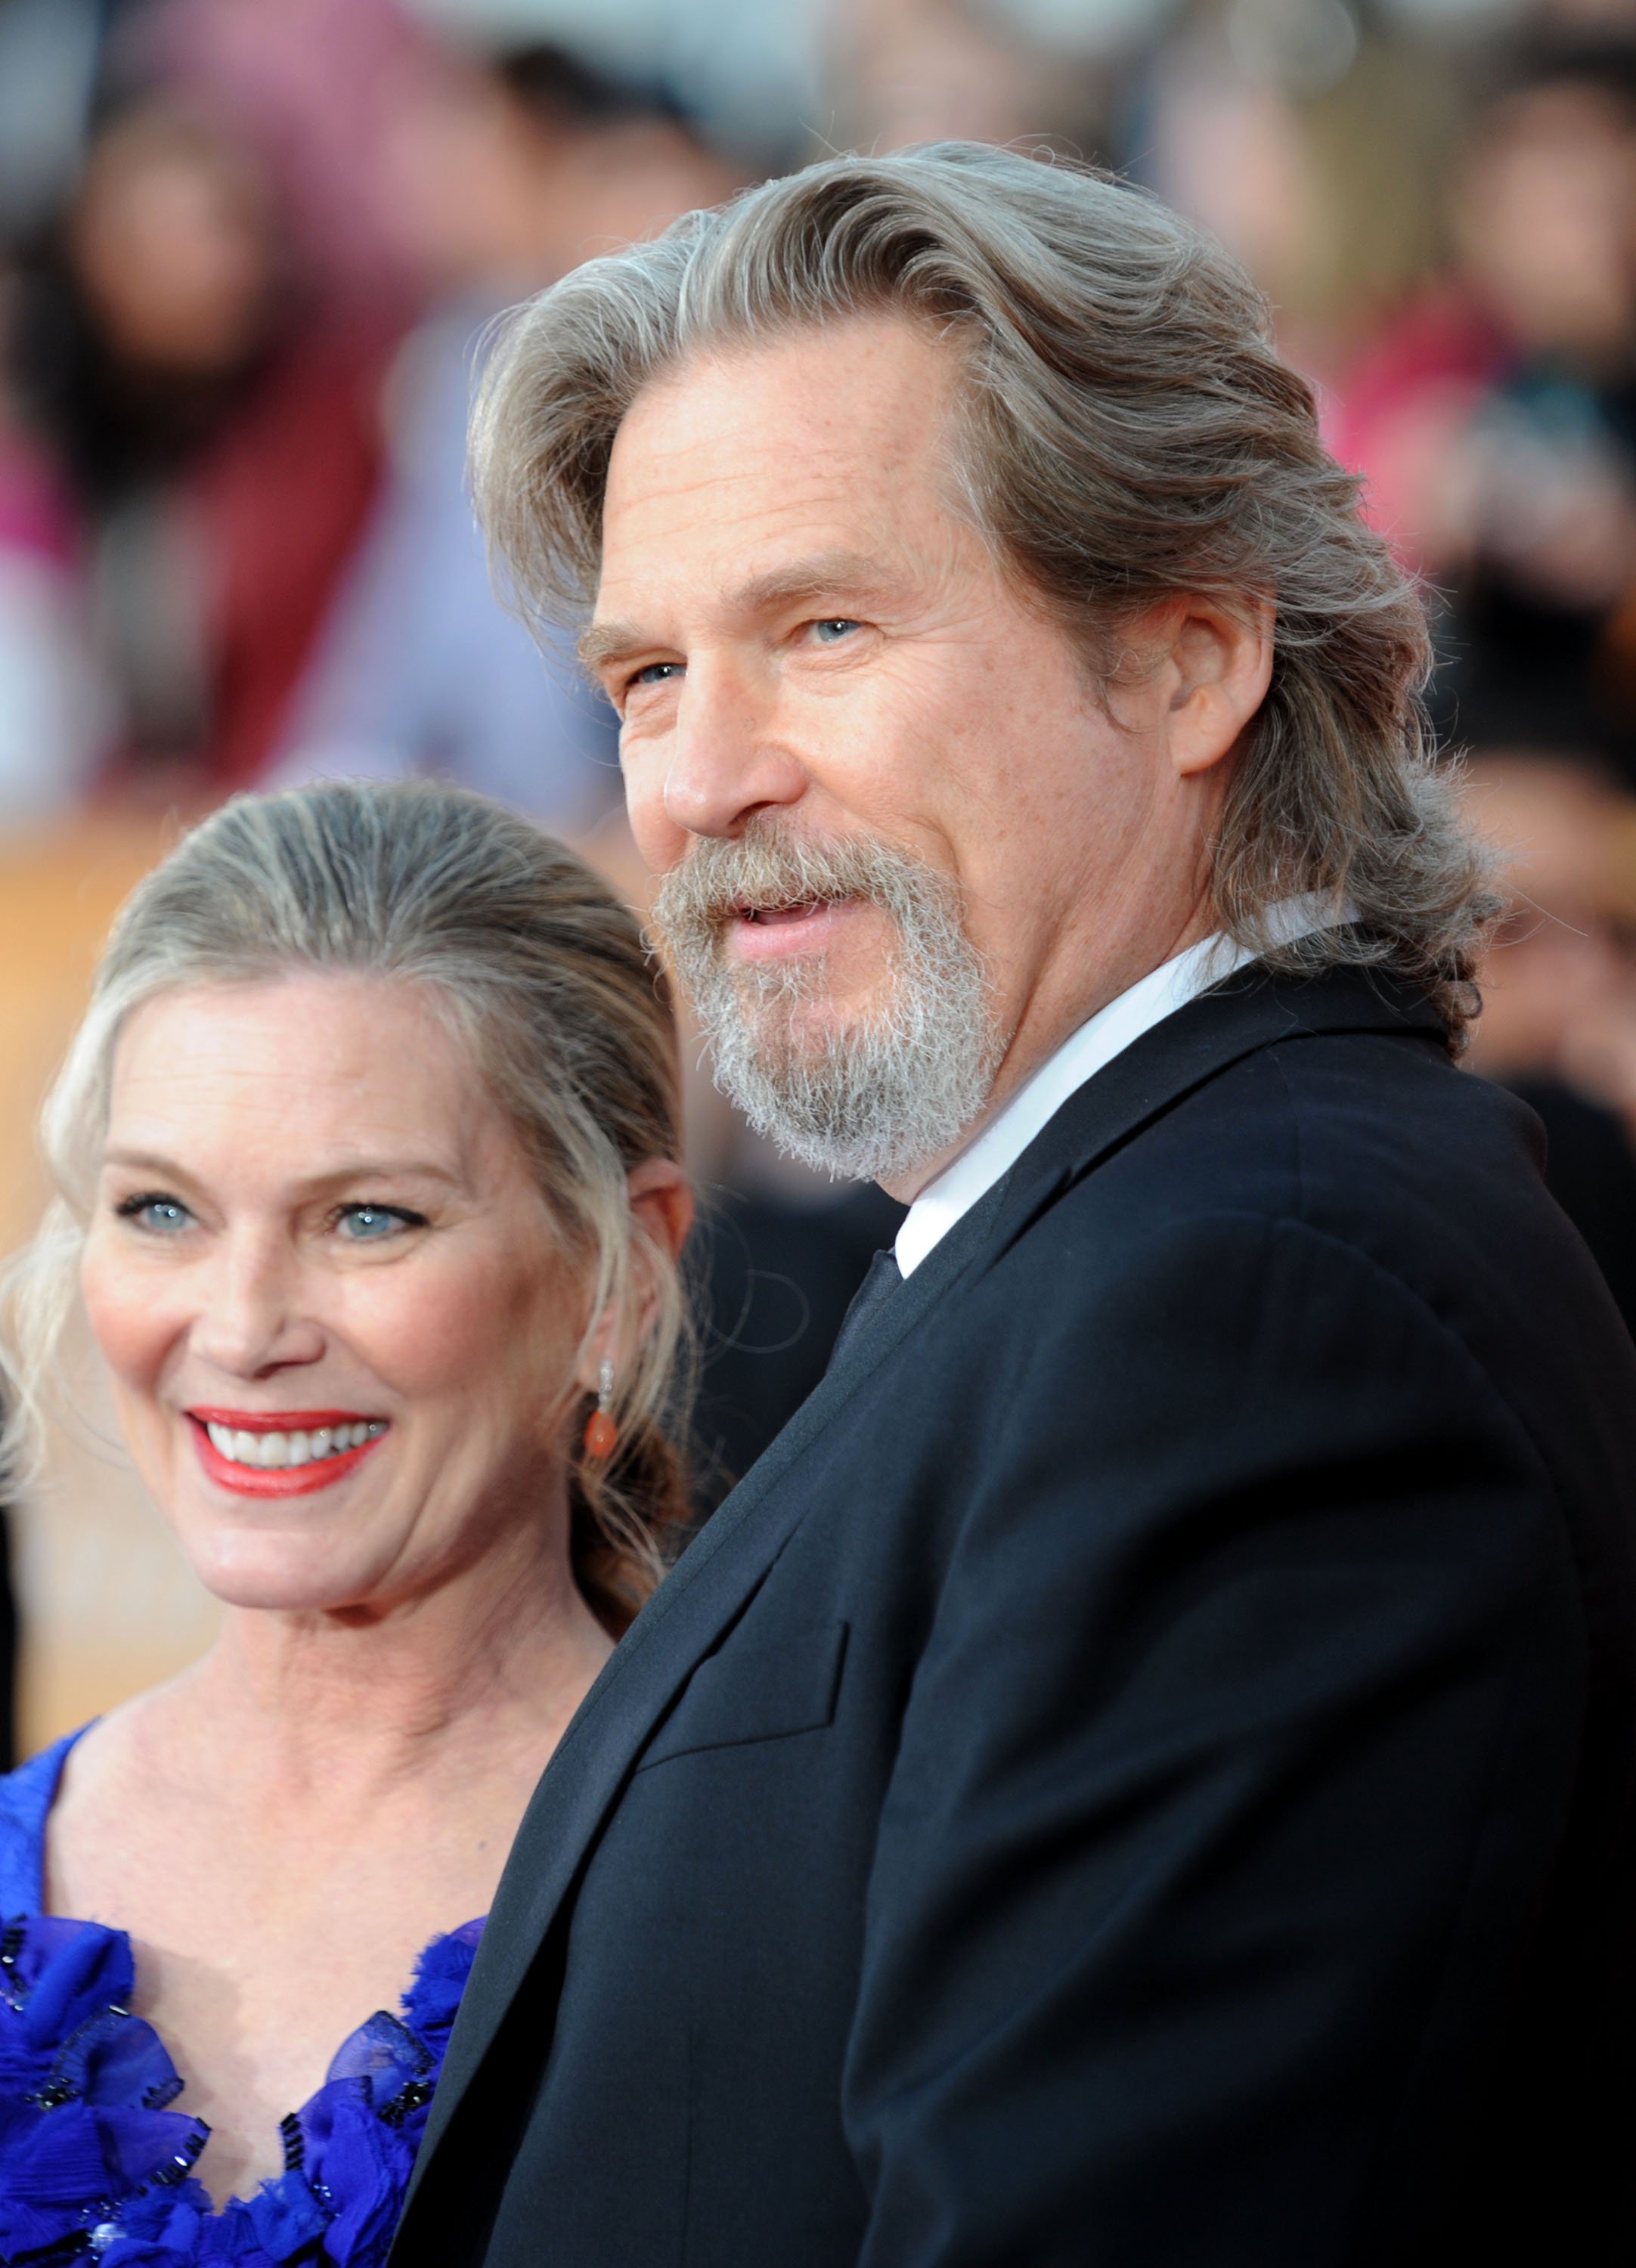 Actor Jeff Bridges and wife Susan Bridges arrive at the 16th Annual Screen Actors Guild Awards held at the Shrine Auditorium on January 23, 2010 in Los Angeles, California. | Source: Getty Images